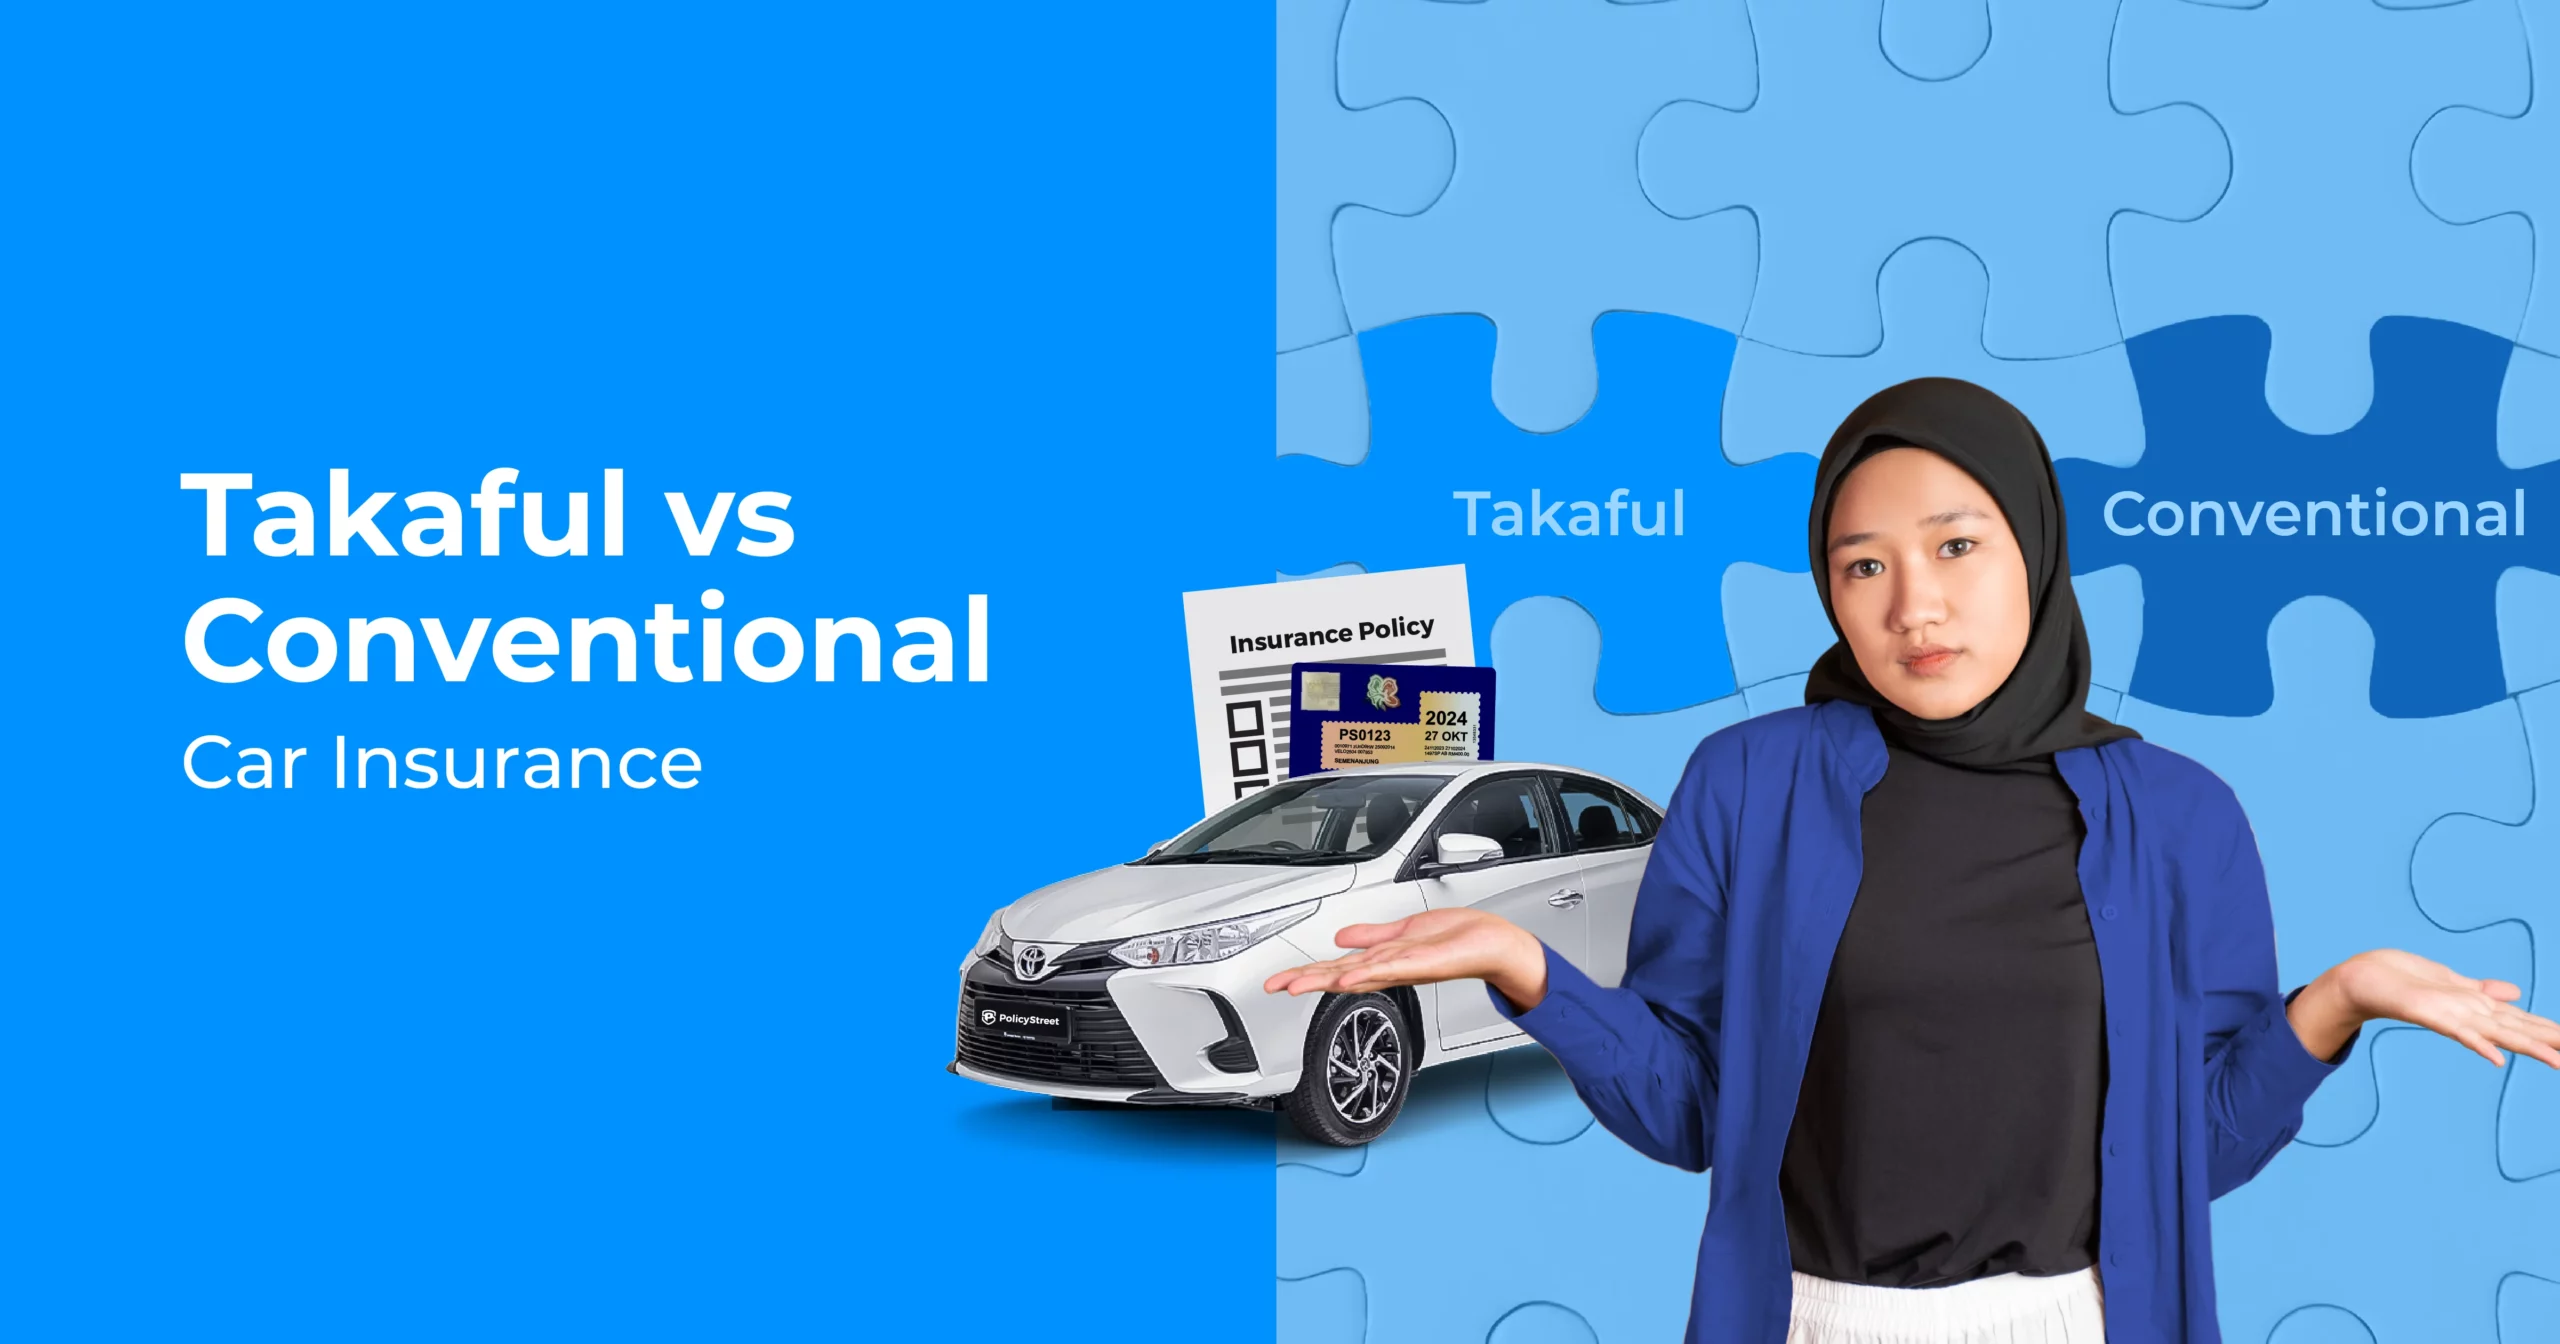 11This article talks about the differences and similarities between Takaful vs Conventional Car Insurance.